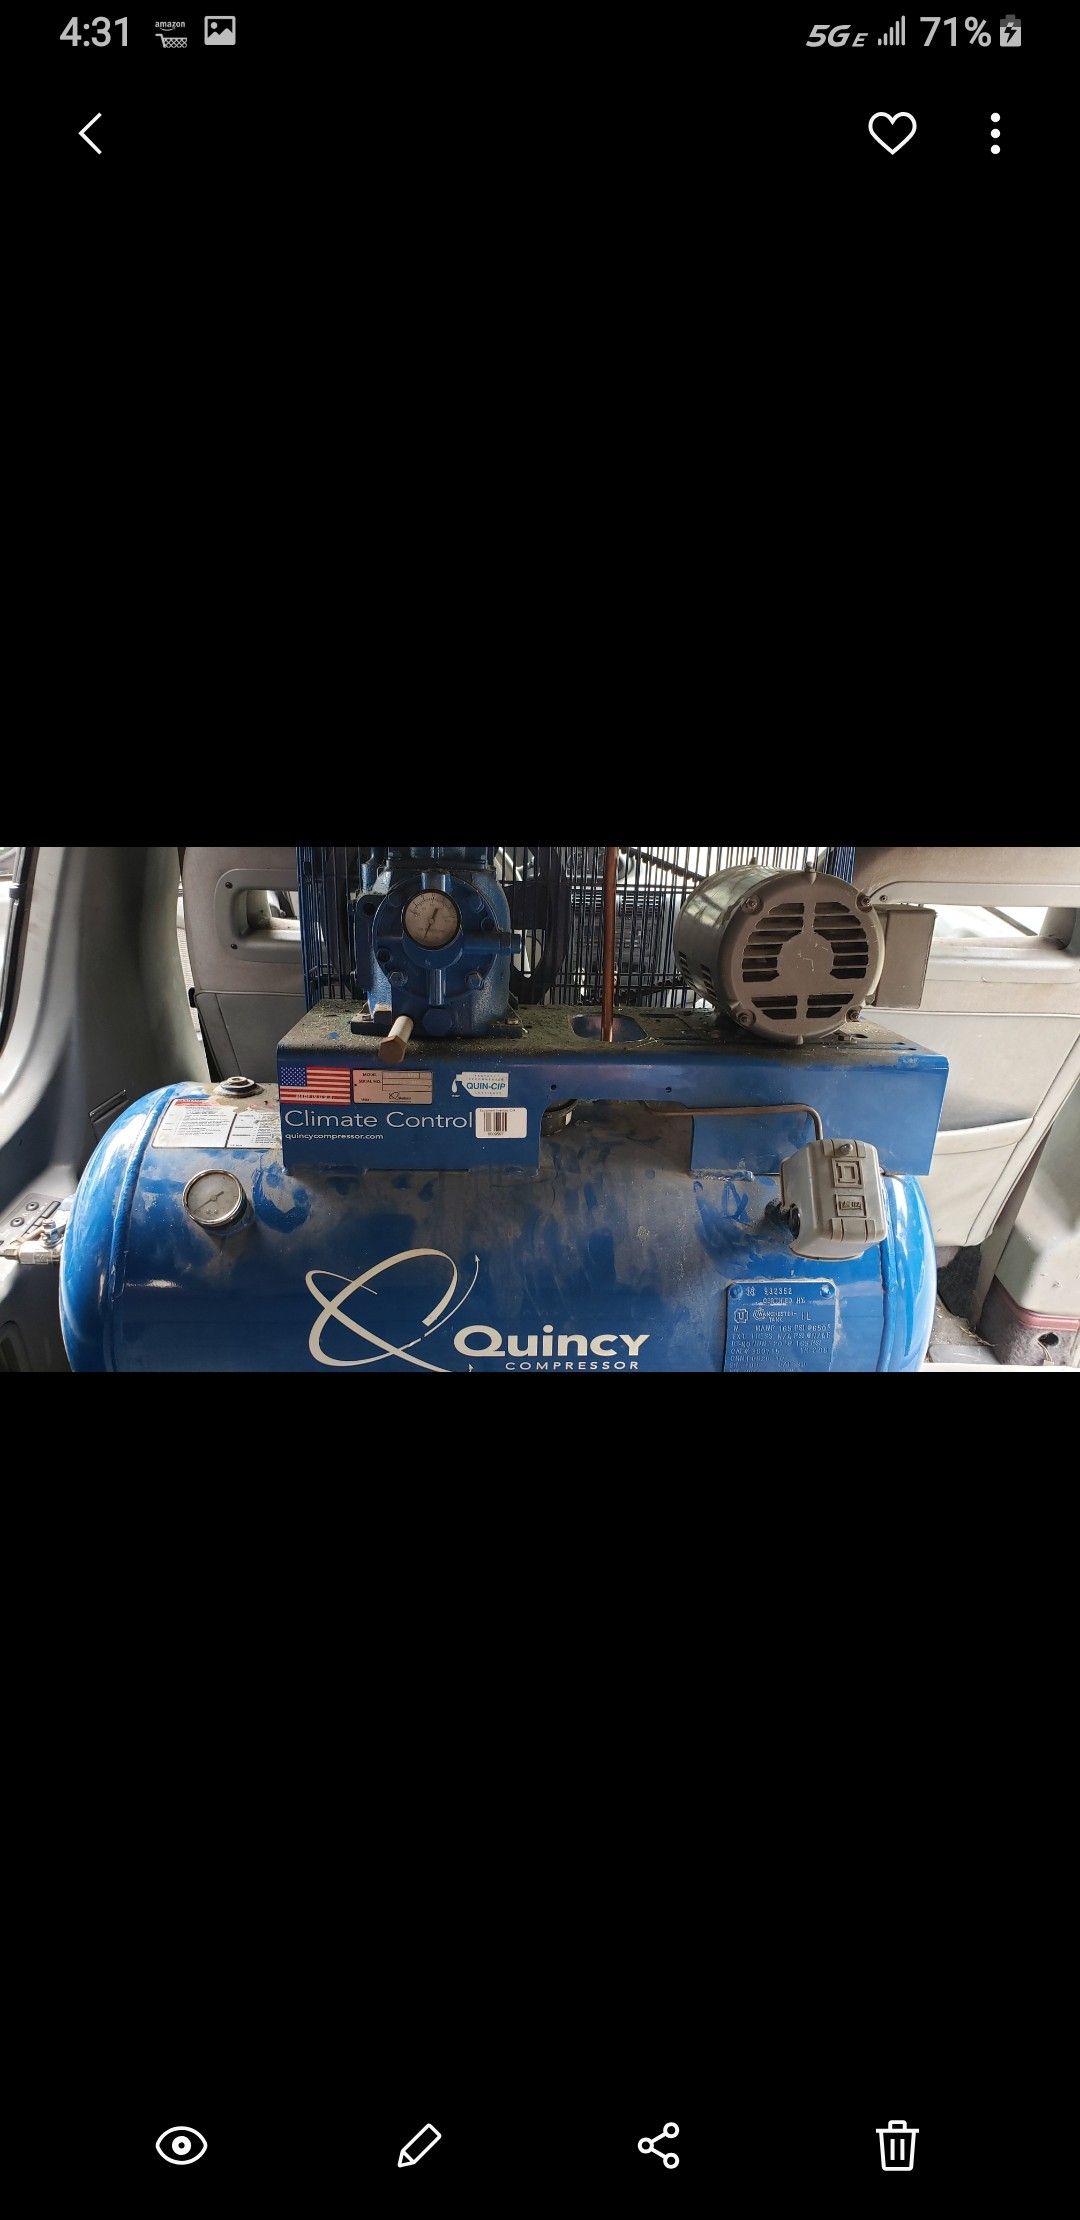 Quincy Air Compressor, 50 gallon compressor with air conditioning unit and water traps. Can be wired for 110 or 220. Retails for $2,000 new.